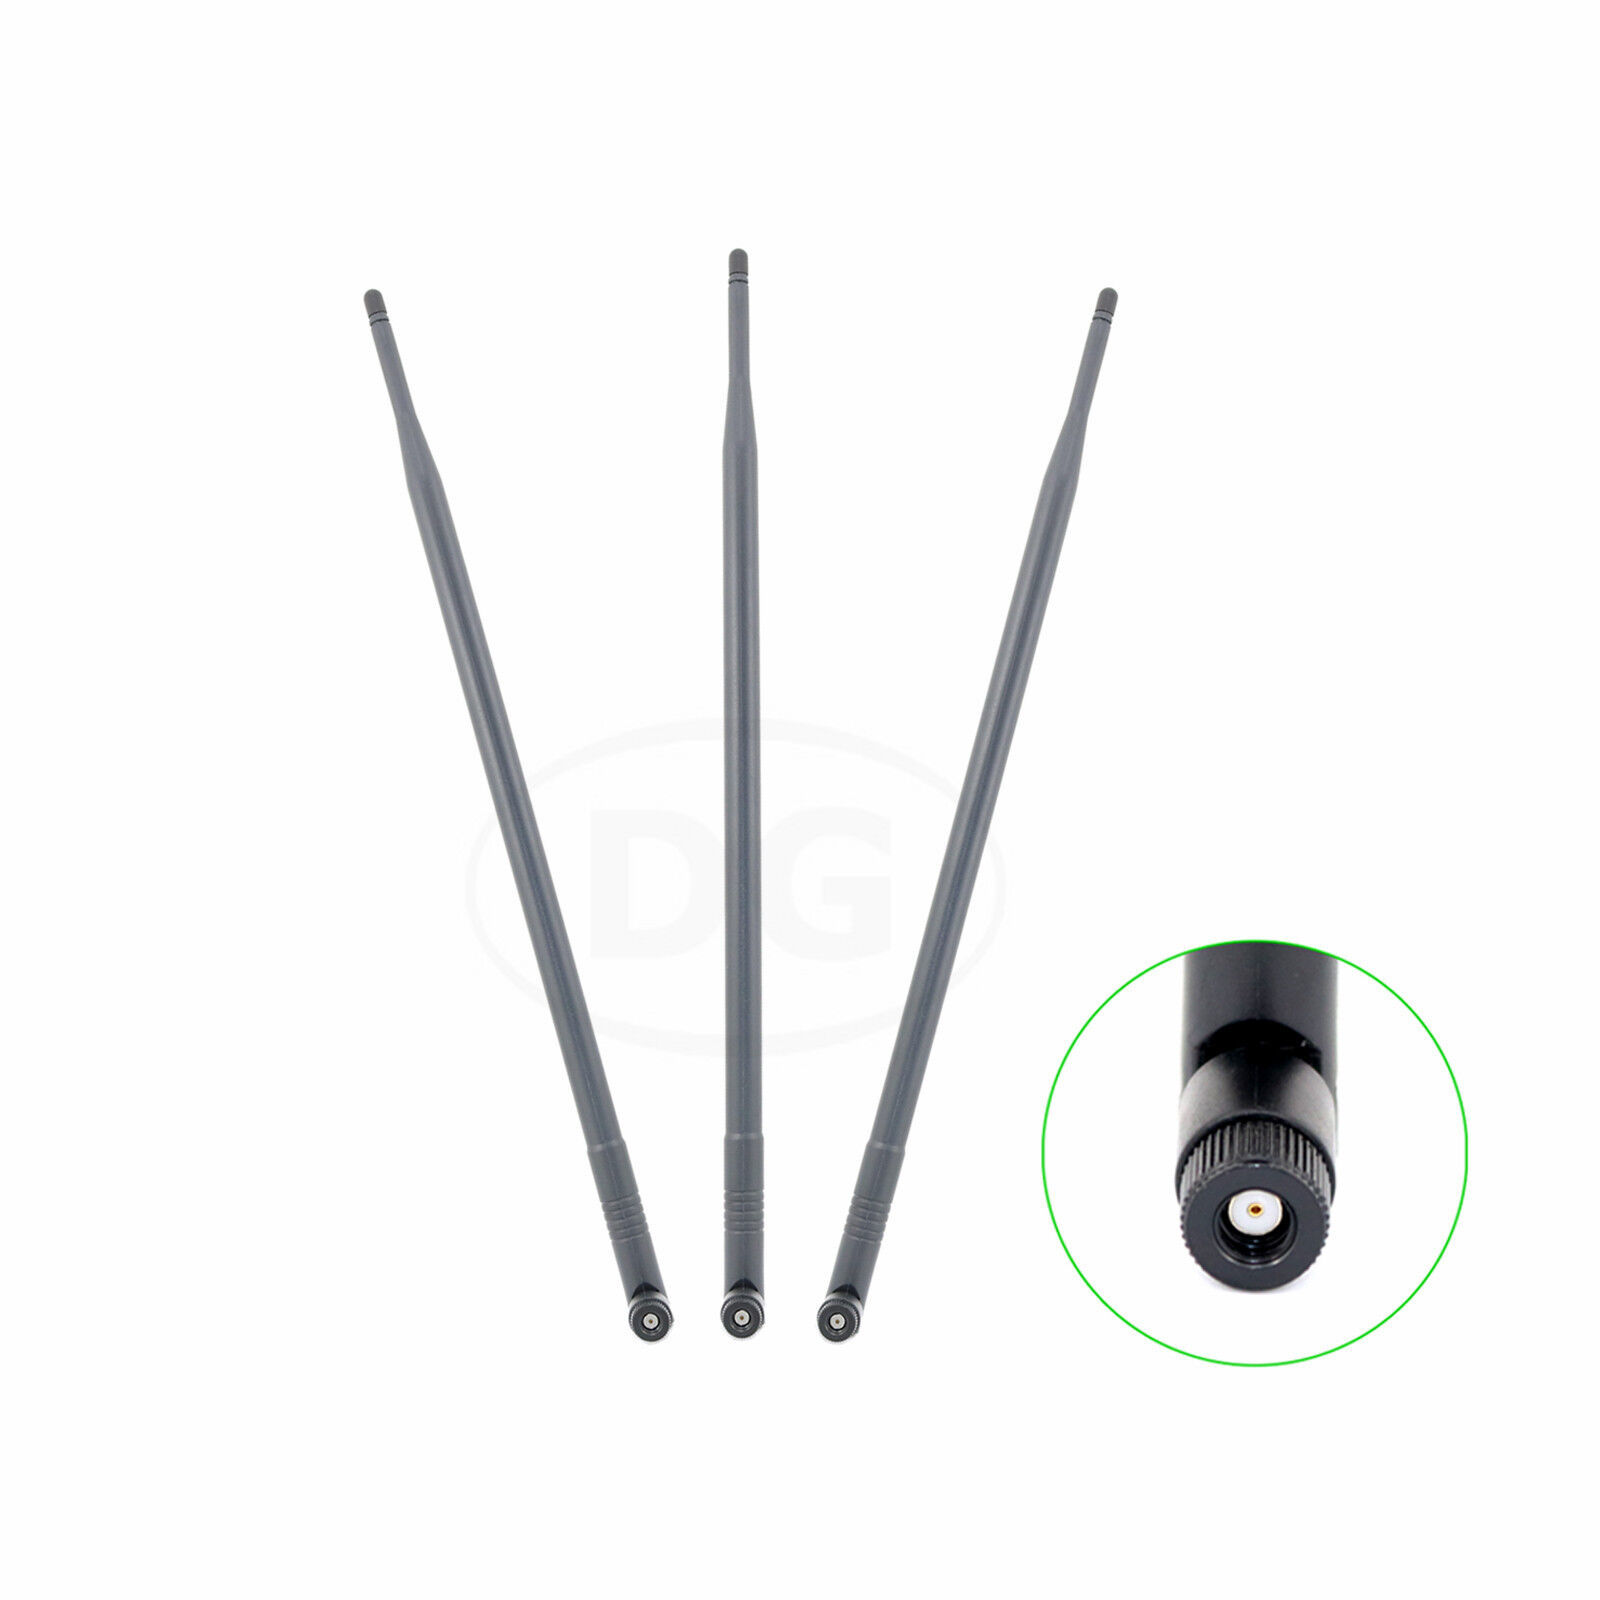 9dBi 2.4GHz 5GHz Dual Band RP-SMA WiFi Antenna For TP-Link TL-WR940N TL-WDN4800 - $21.99